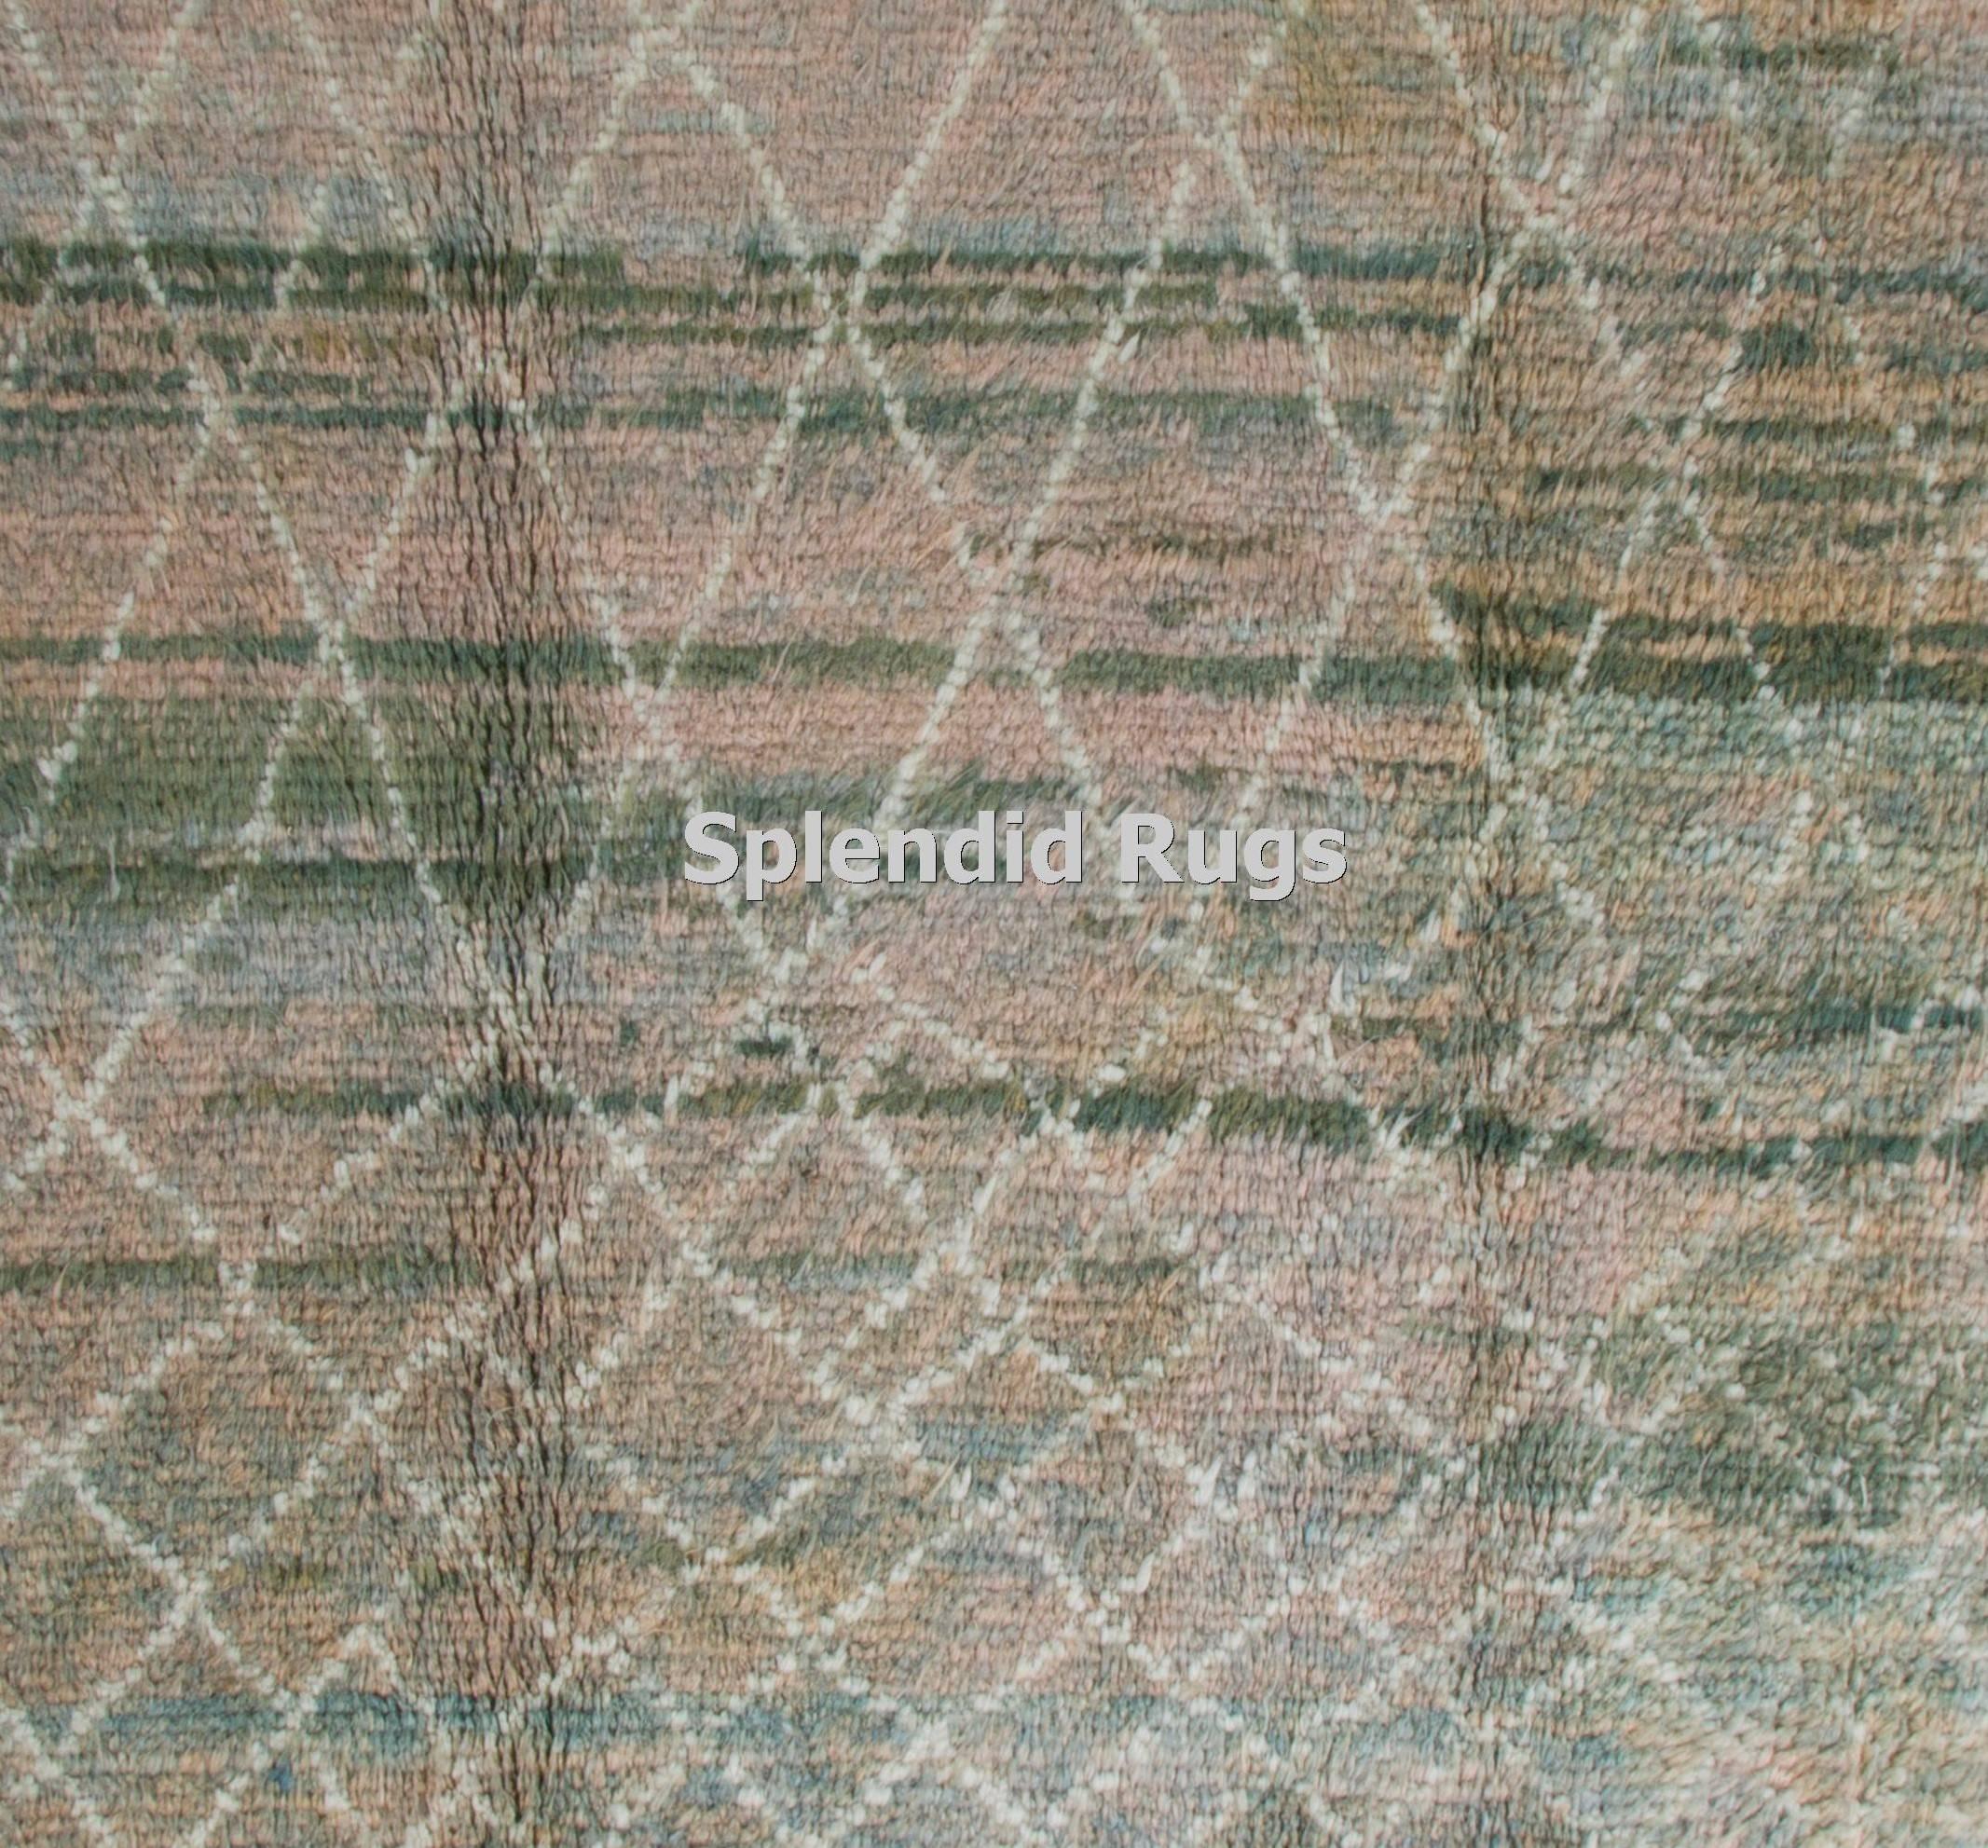 A contemporary hand-knotted Moroccan rug made of lamb’s wool. Thick and soft pile and beautiful aqua blue, turquoise, green and beige colors. Available as it is or made to measure in any size, design and color combination requested.